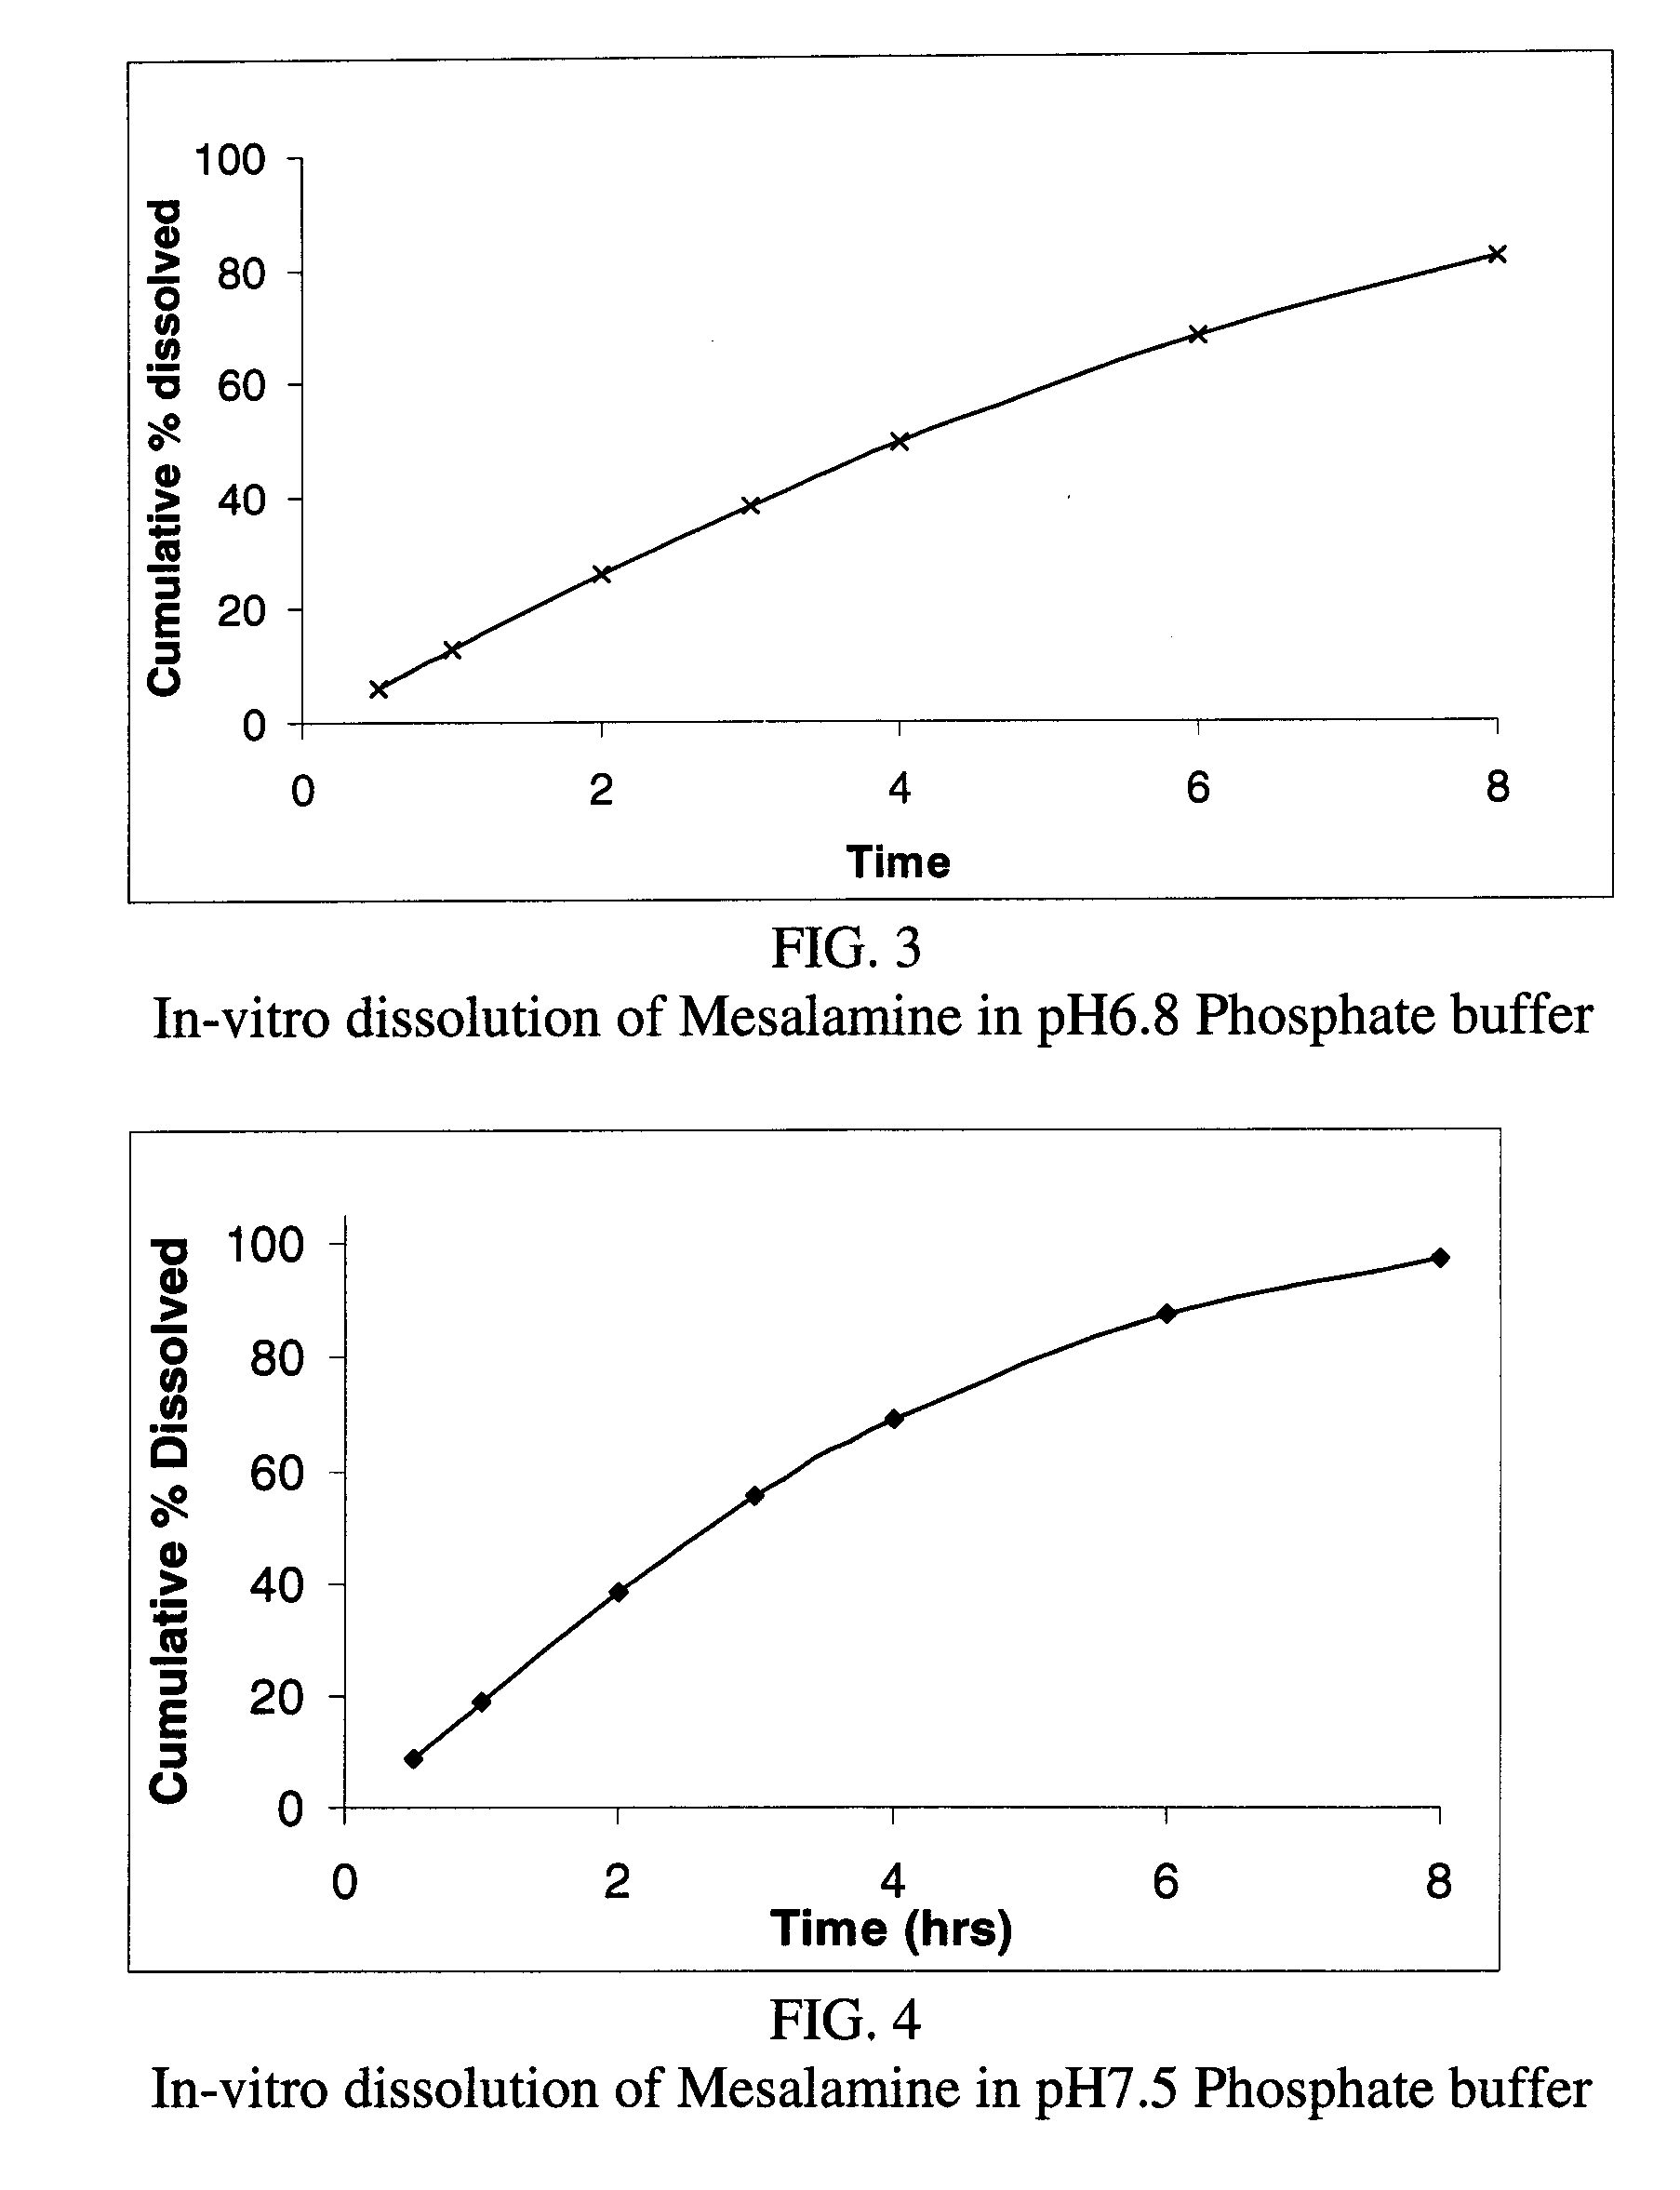 Modified release formulations of Anti-irritability drugs